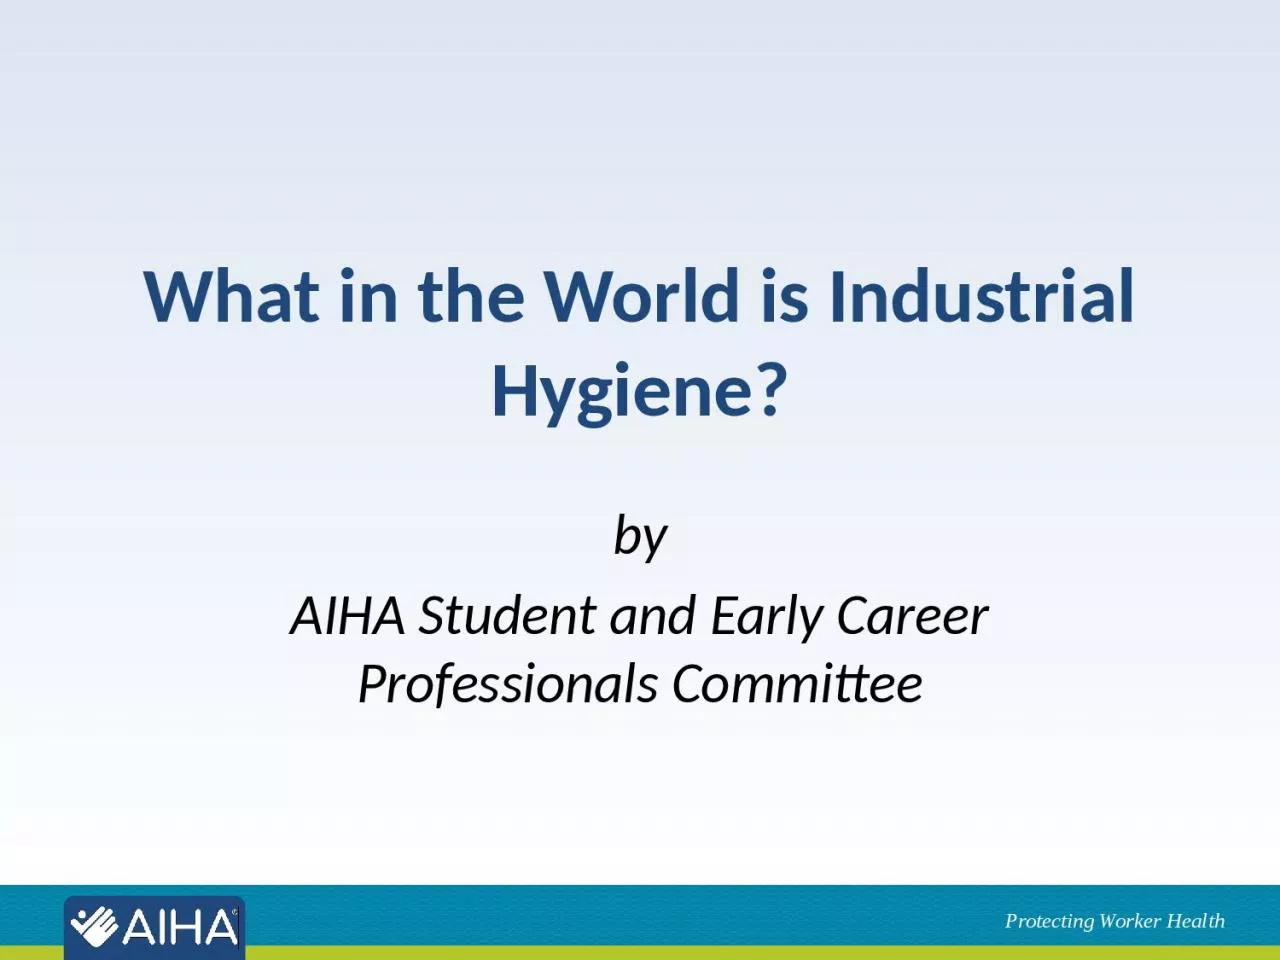 What in the World is Industrial Hygiene?